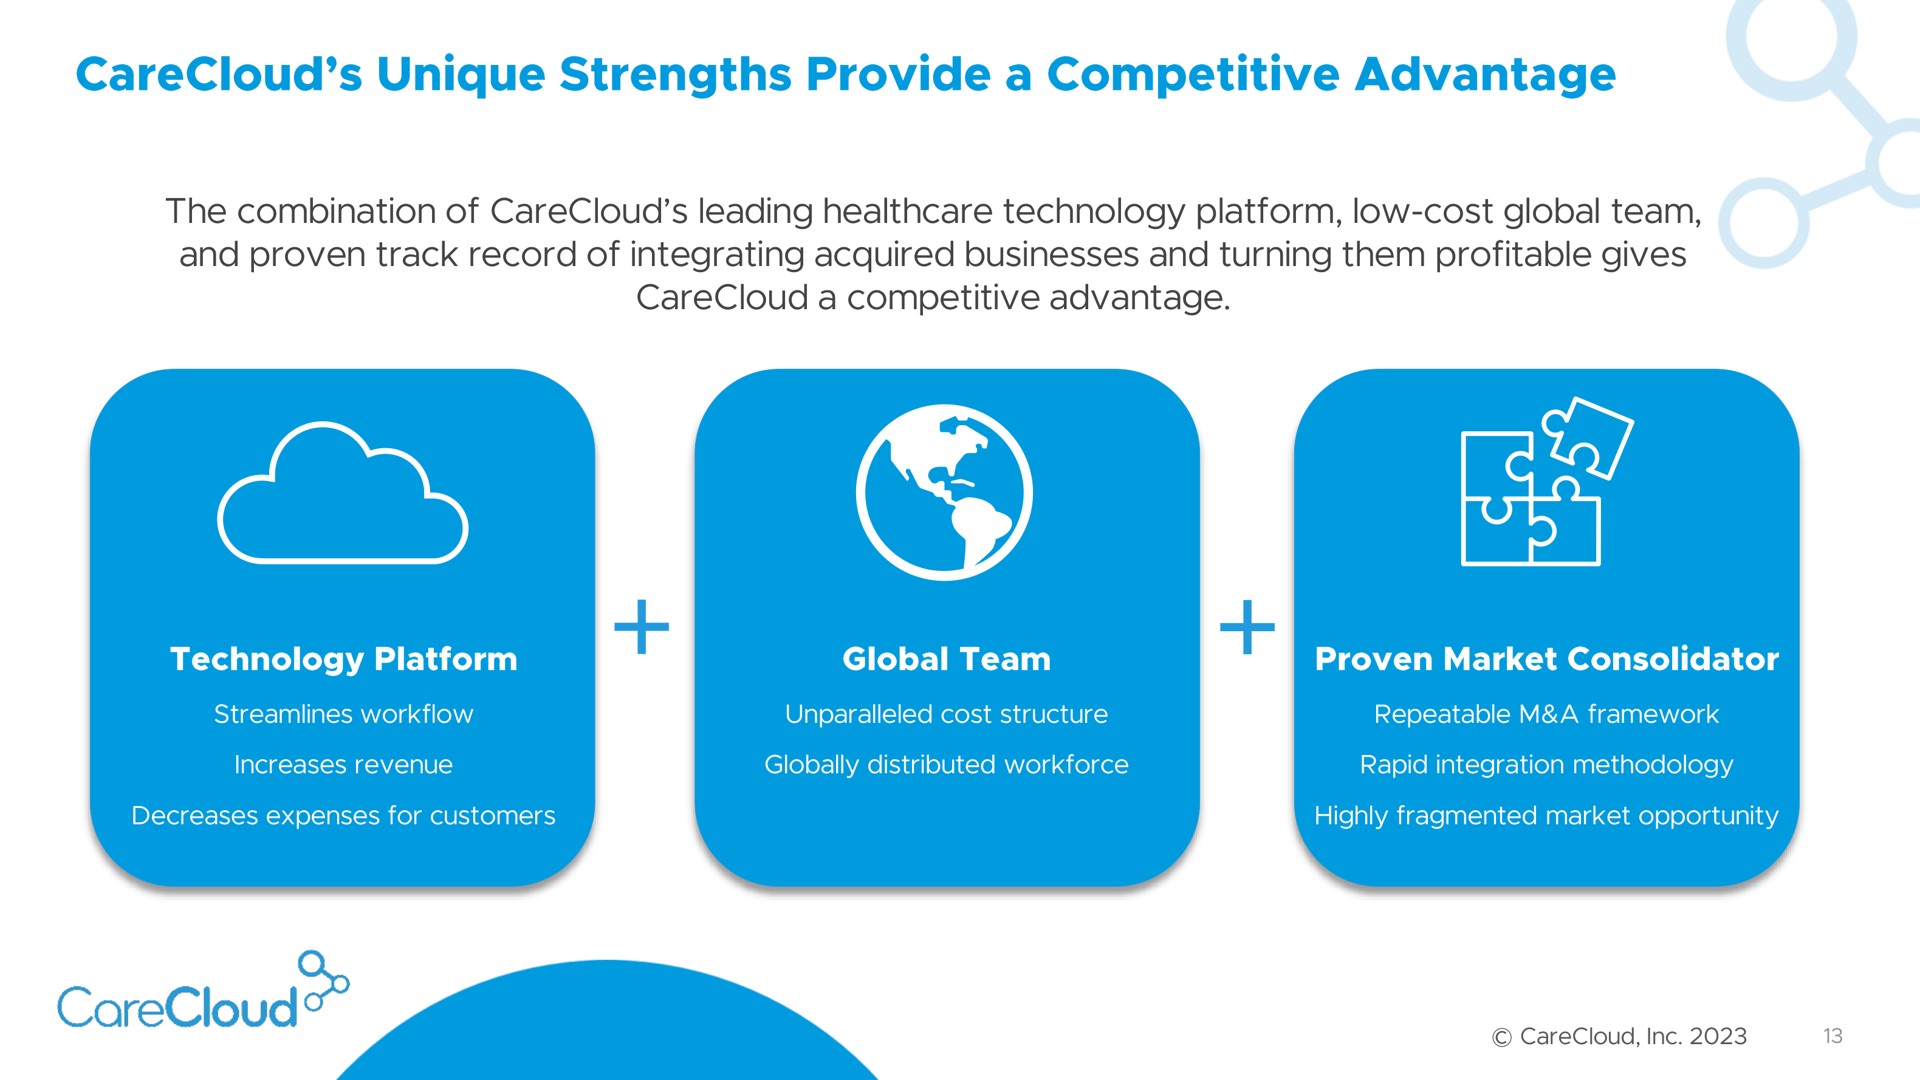 the combination of leading technology platform low cost global team and proven track record of integrating acquired businesses and turning them profitable gives a competitive advantage streamlines increases revenue unparalleled cost structure repeatable a framework globally distributed rapid integration methodology decreases expenses for customers highly fragmented market opportunity unique strengths provide | CareCloud